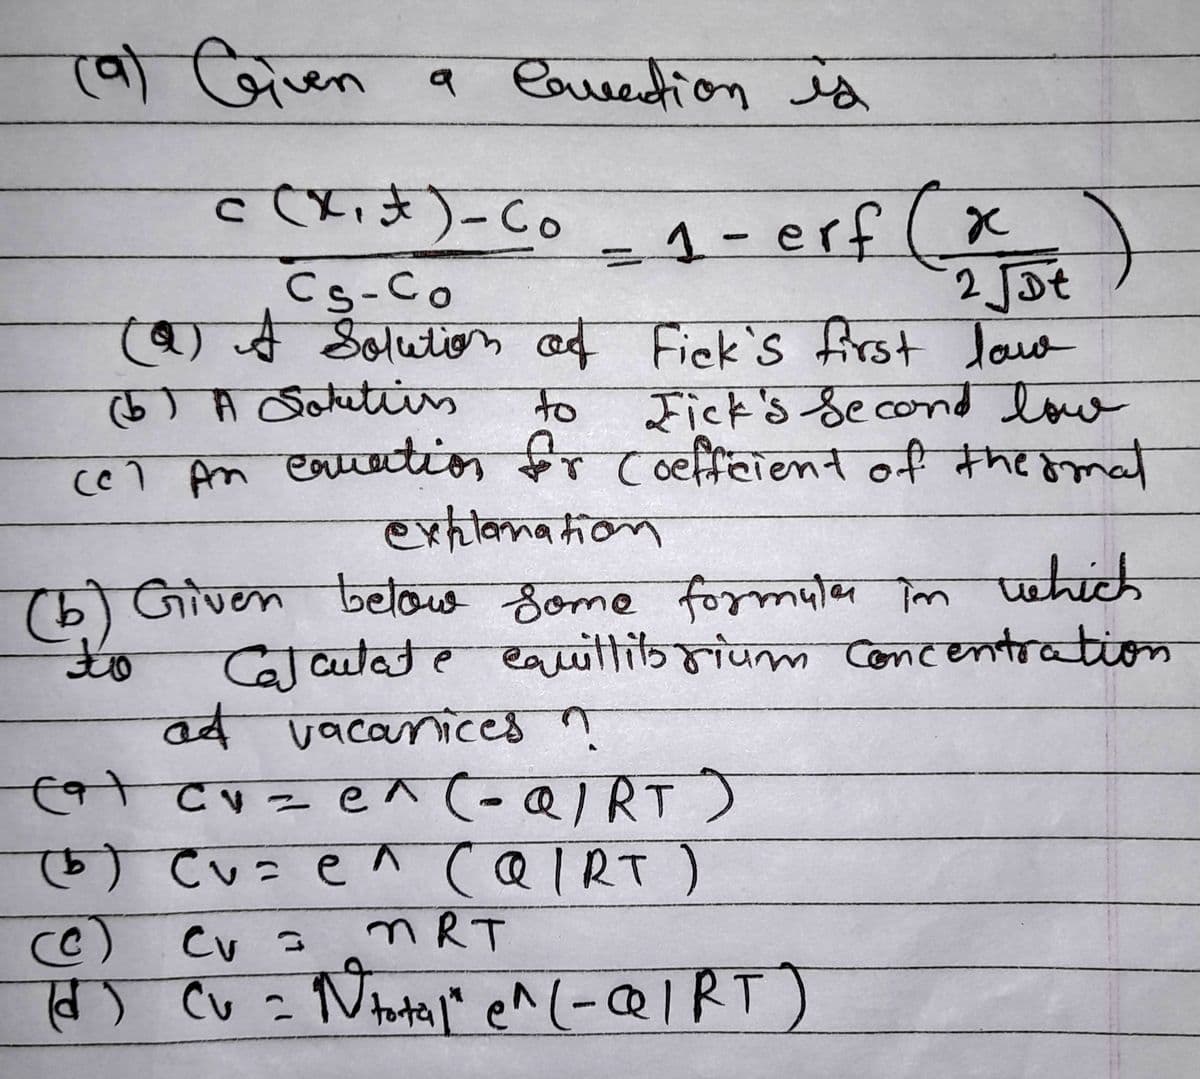 a lovation is
c (x₁x) - Co _ 1 - erf
(9) Given
1-erf (x)
Cs-Co
2 √ot
(9) A Solution of Fick's first lov
(5) A Soutiis
to
Fick's Second low
cel An equation for Coefficient of the smal
explanation
(b) Given below some formula in which
Calculate equillits rium concentration
at vacanices ?
to
cat cu = e^(-QIRT)
(b) Cv=e^ (QIRT)
(c) cv =
MRT
(d) Cu = N total" e^ (-QIRT)